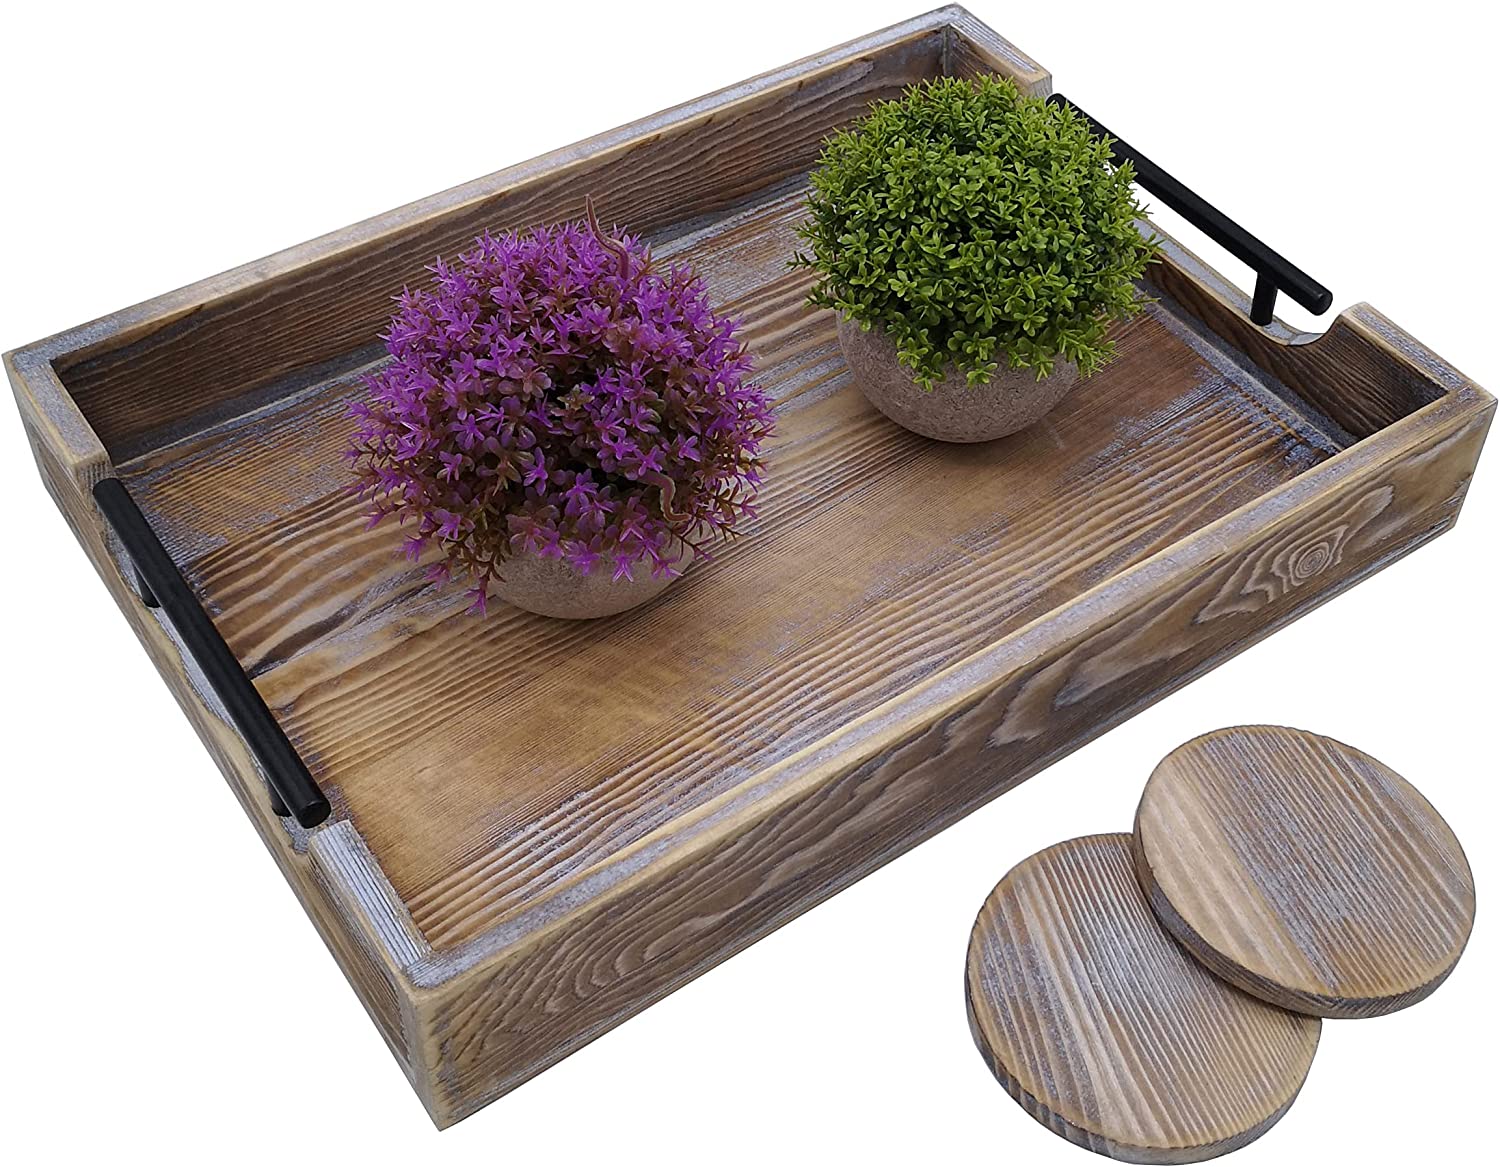 Decorative trays can multi function for quick pick ups